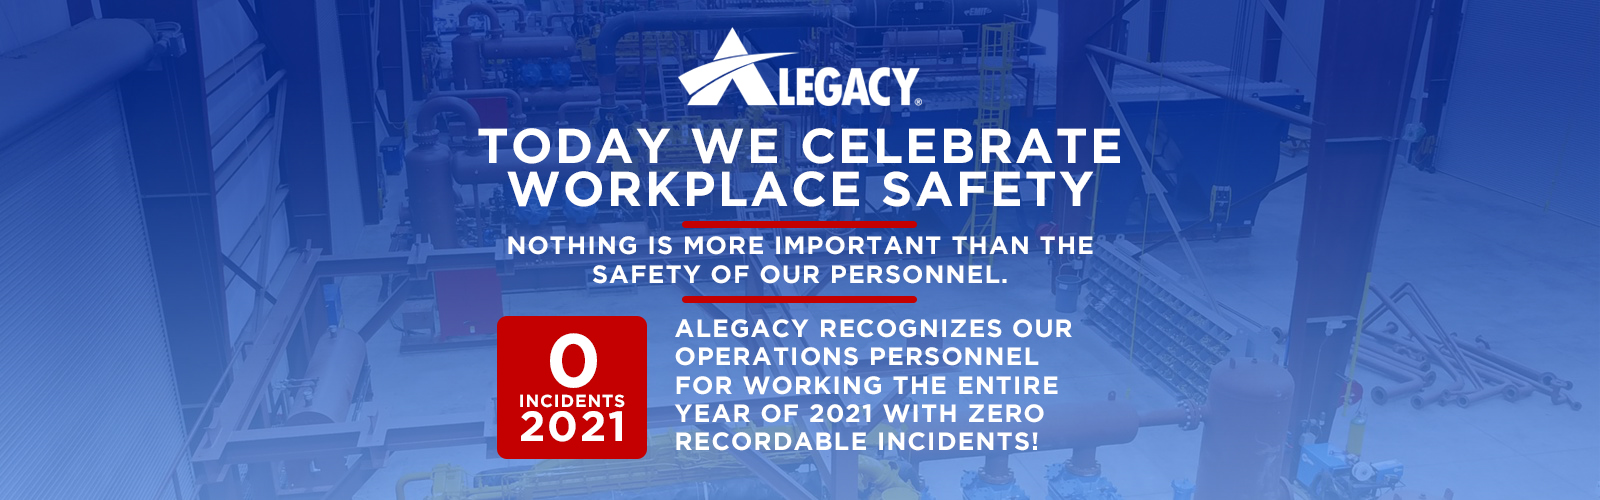 Today we celebrate workplace safety. Nothing is more important than the safety of our personnel. Alegacy recognizes our operations personnel for working the entire year of 2021 with ZERO recordable incidents!